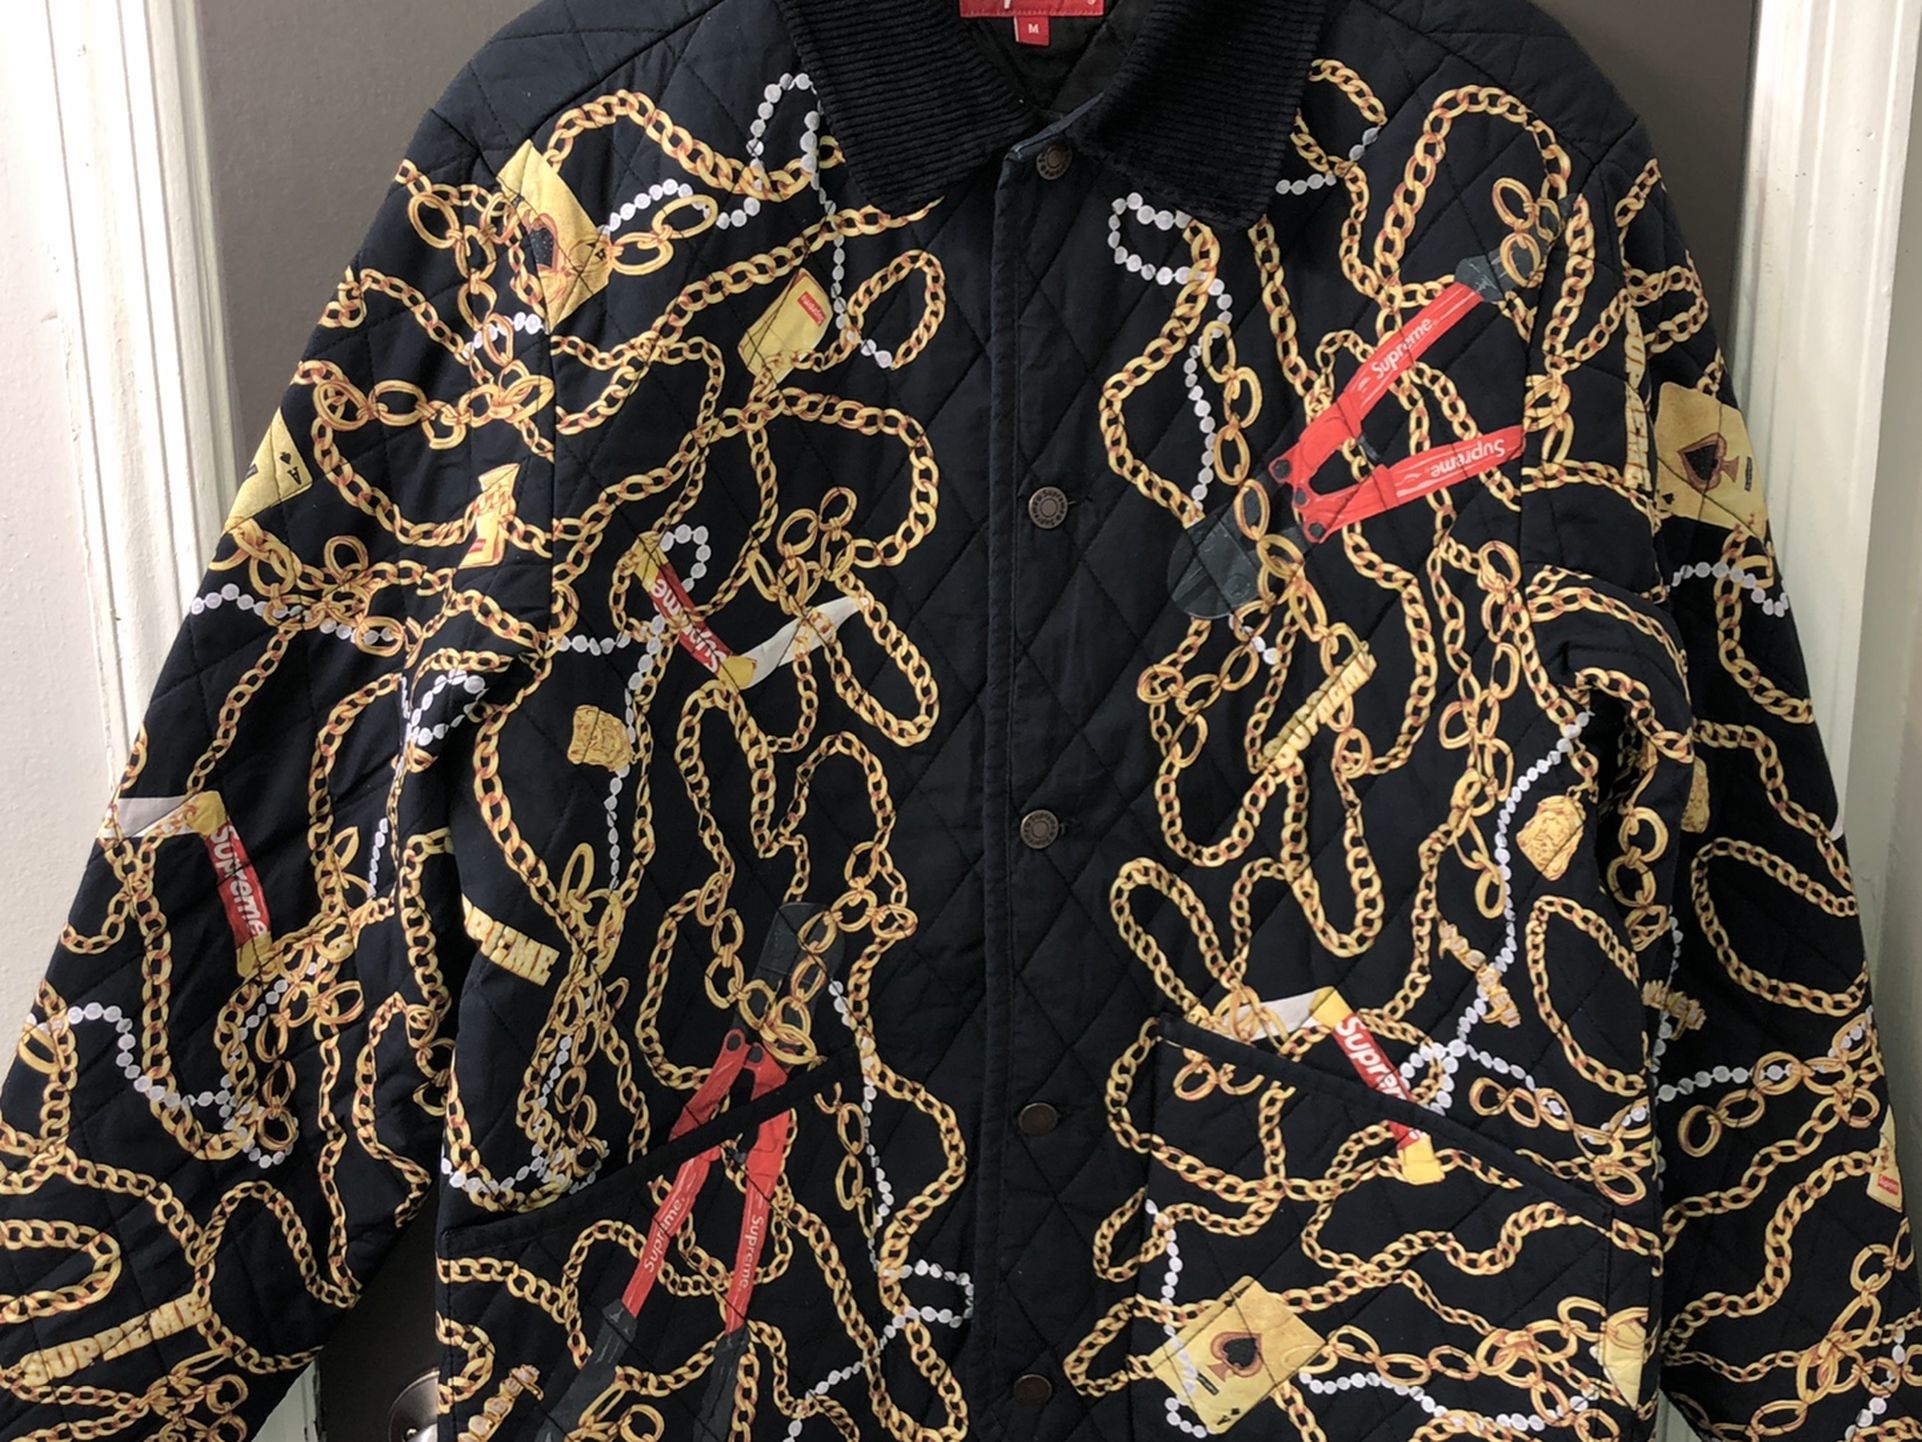 BRAND NEW 100% Authentic SUPREME Chains Quilted Jacket Size M Black